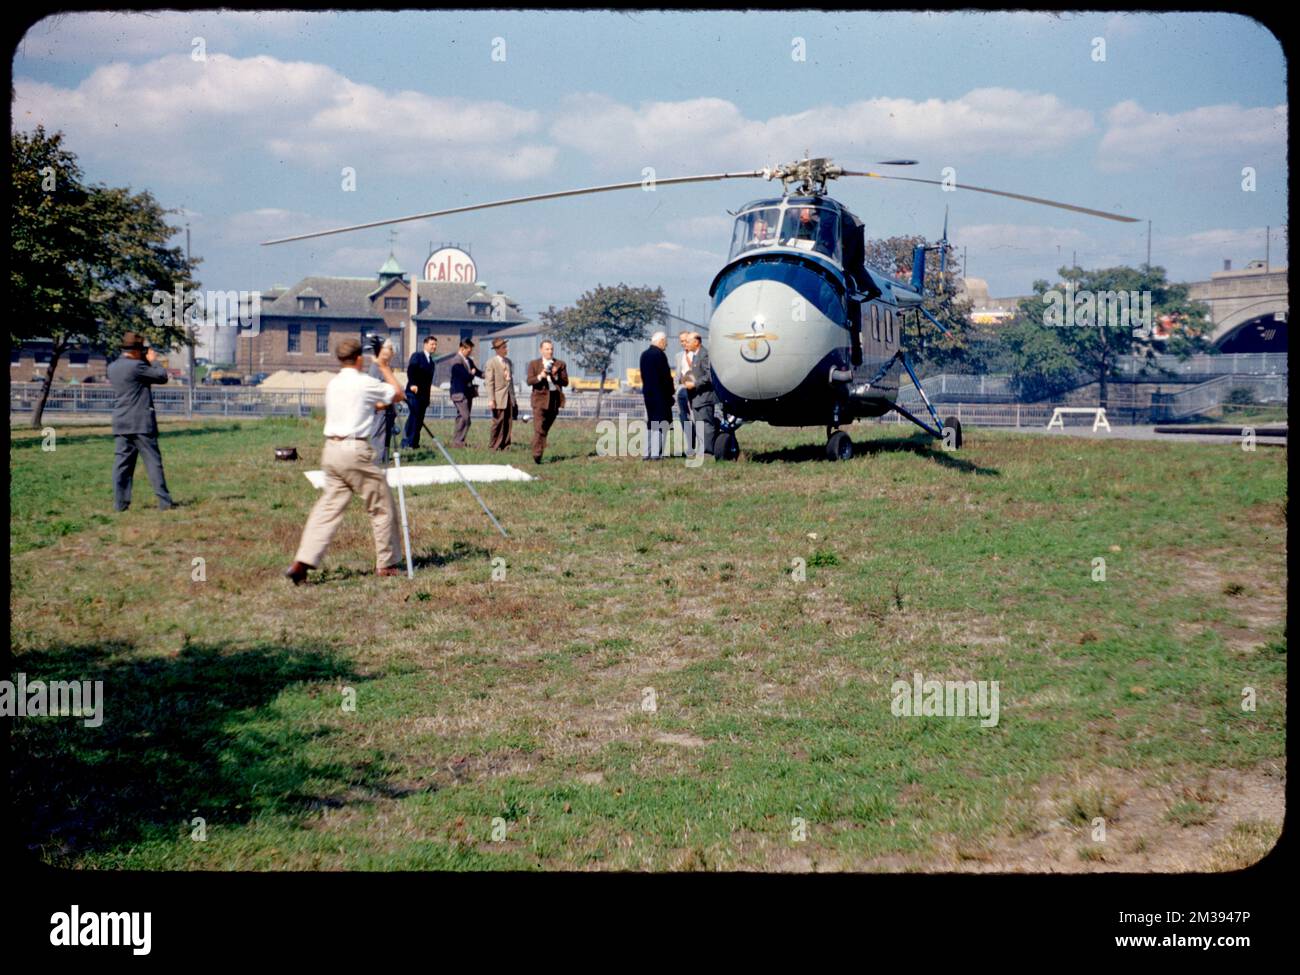 Helicopter, Museums of Science , Helicopters, Aircraft industry, Washburn, Bradford, 1910-2007, Sikorsky, Igor Ivan, 1889-1972, Cabot, Godfrey L. Godfrey Lowell, 1861-1962, Sikorsky Aviation Corporation. Edmund L. Mitchell Collection Stock Photo